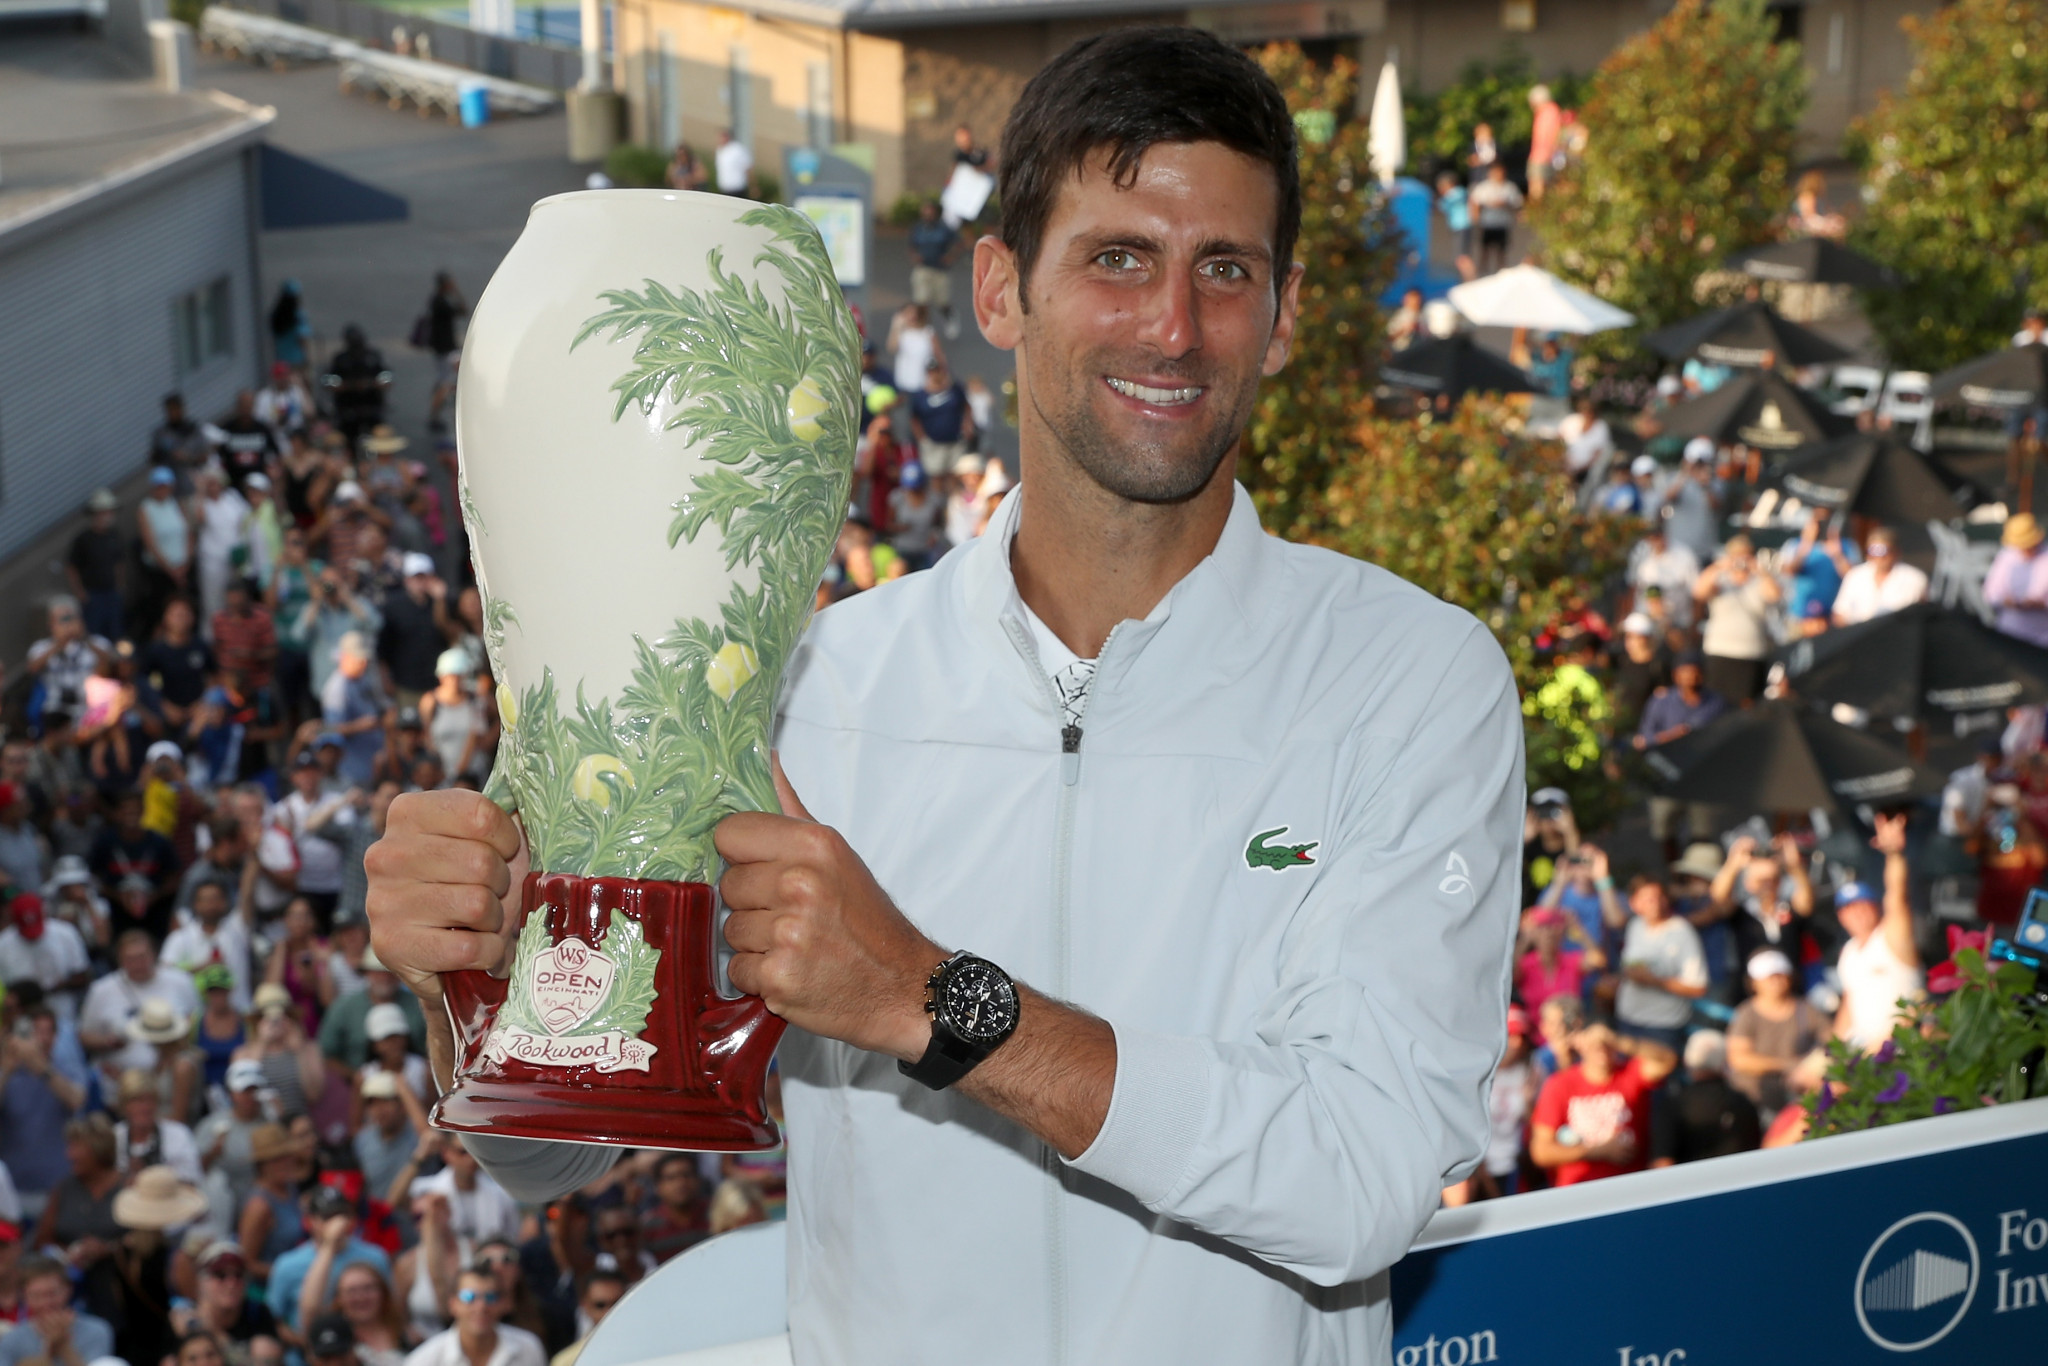 Serbia's Novak Djokovic became the first player to win all nine ATP Masters 1000 events with victory at the Cincinnati Masters ©Getty Images